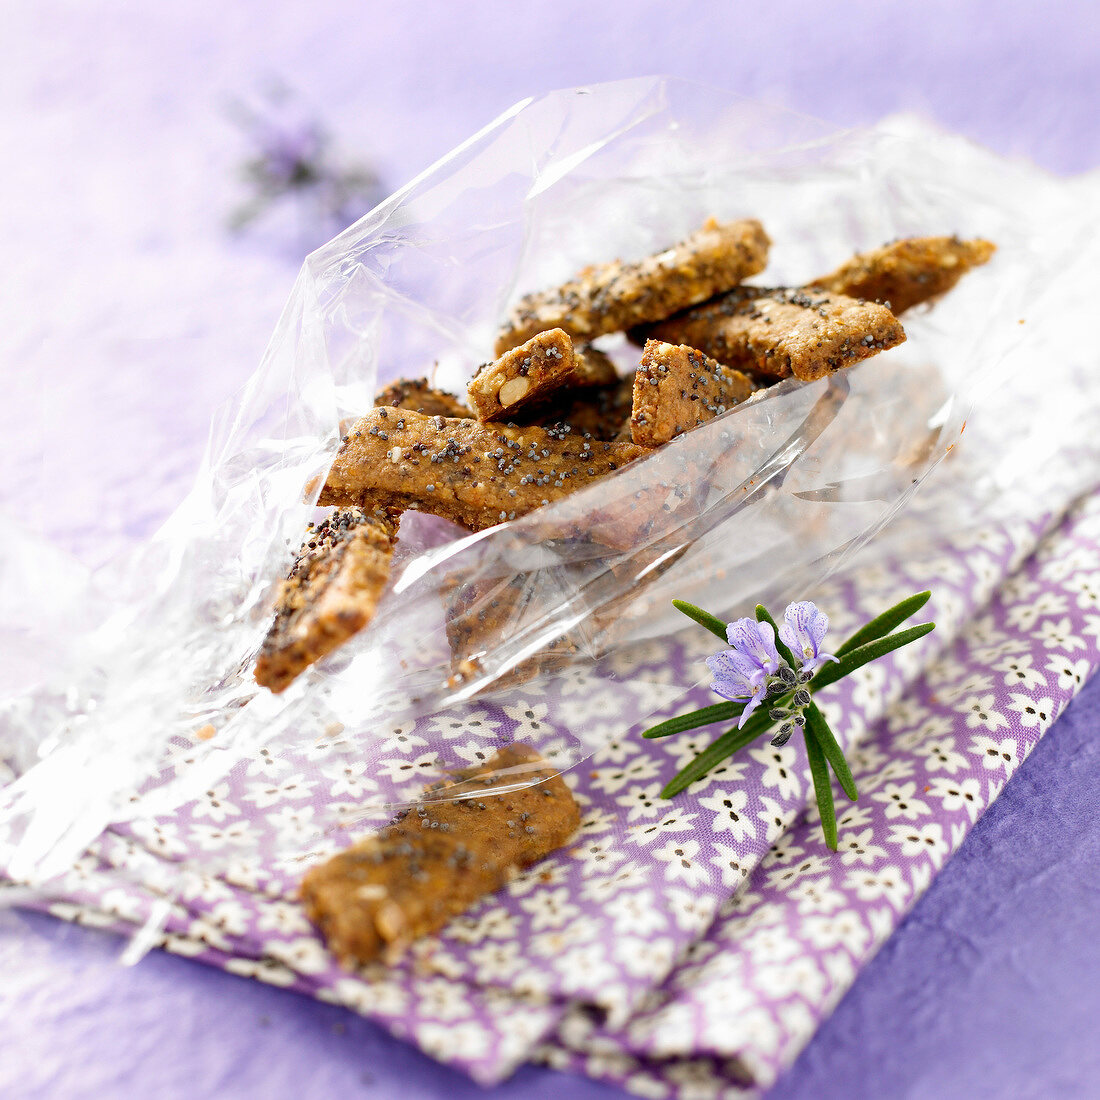 Dried fruit and poppyseed crackers